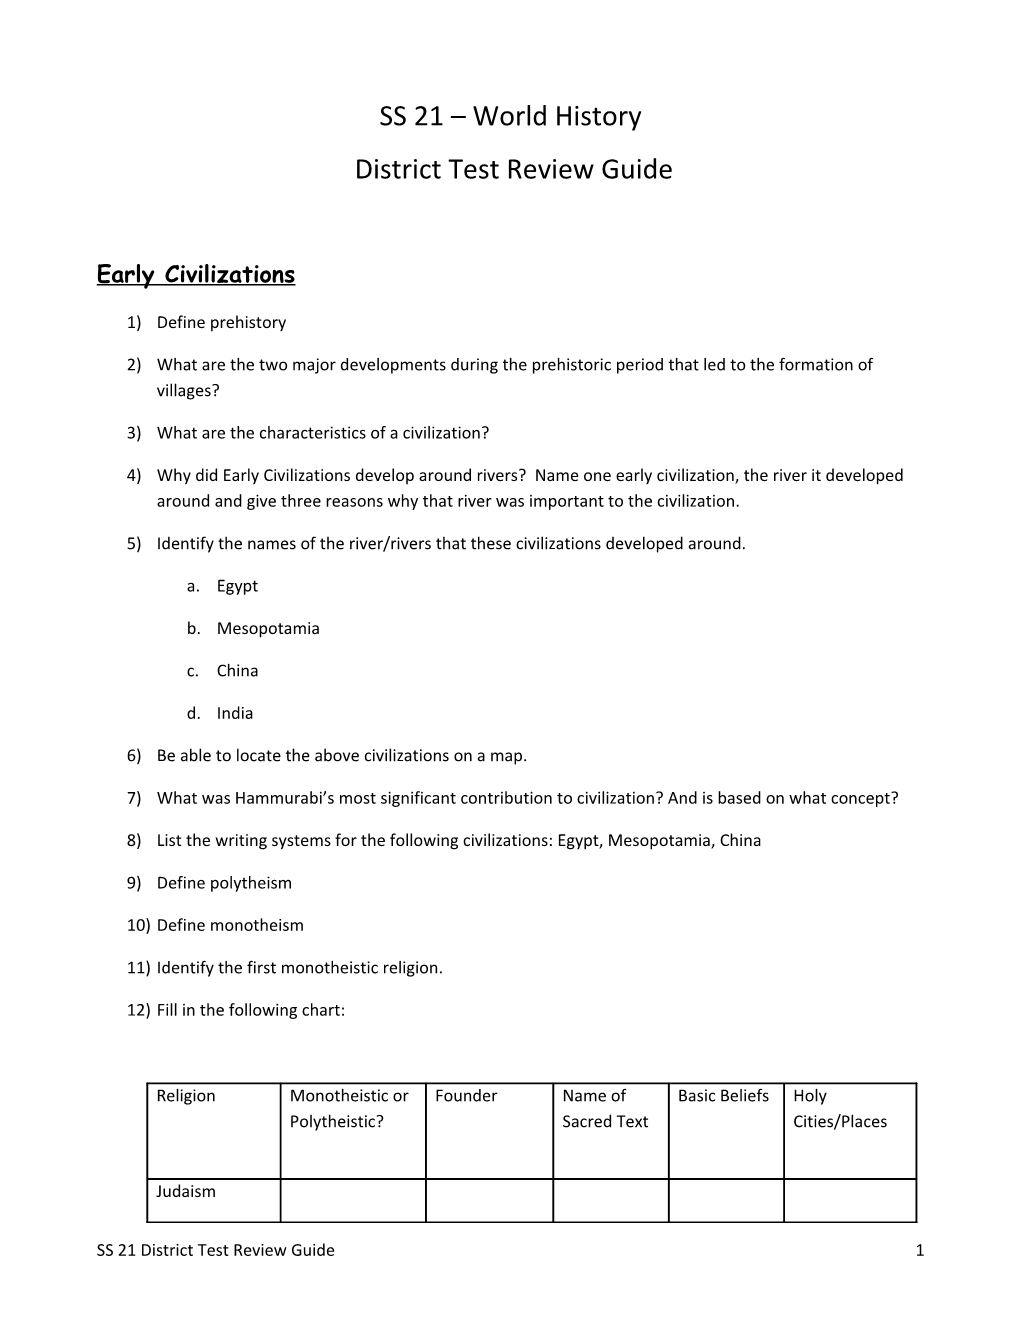 District Test Review Guide